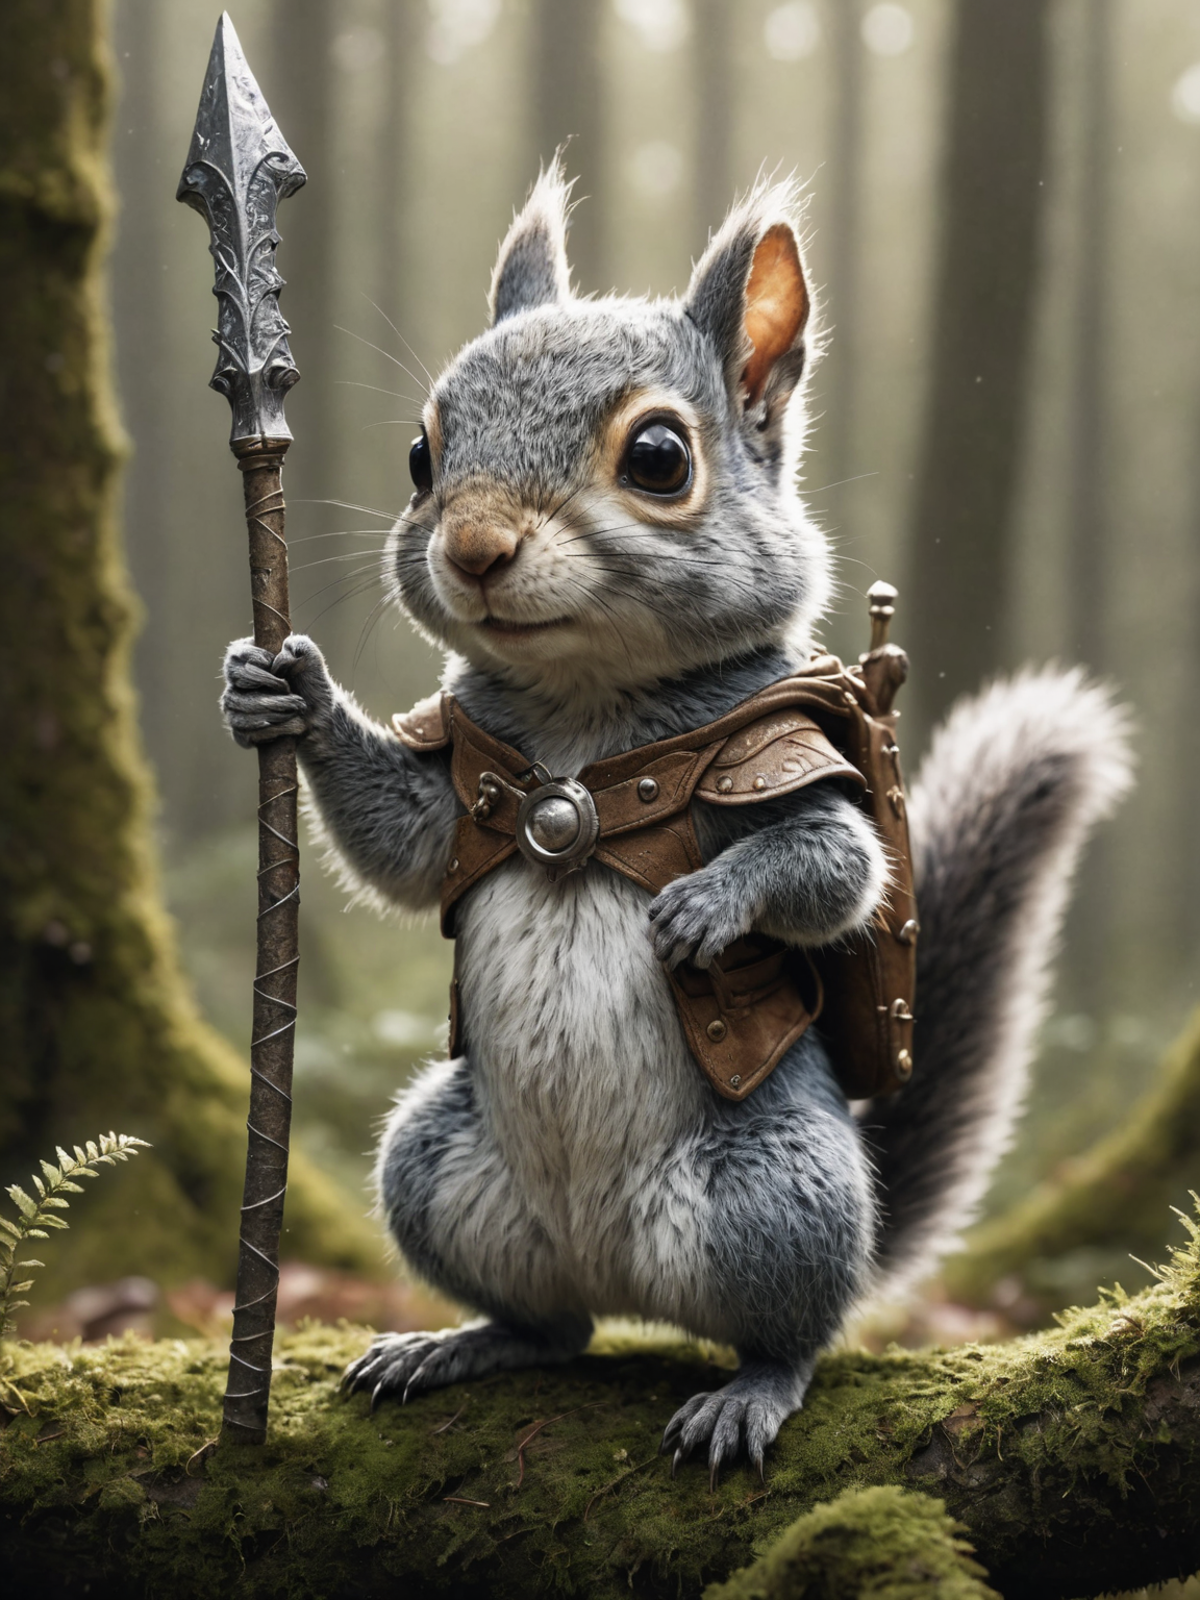 Squirrel with a stick and a backpack.